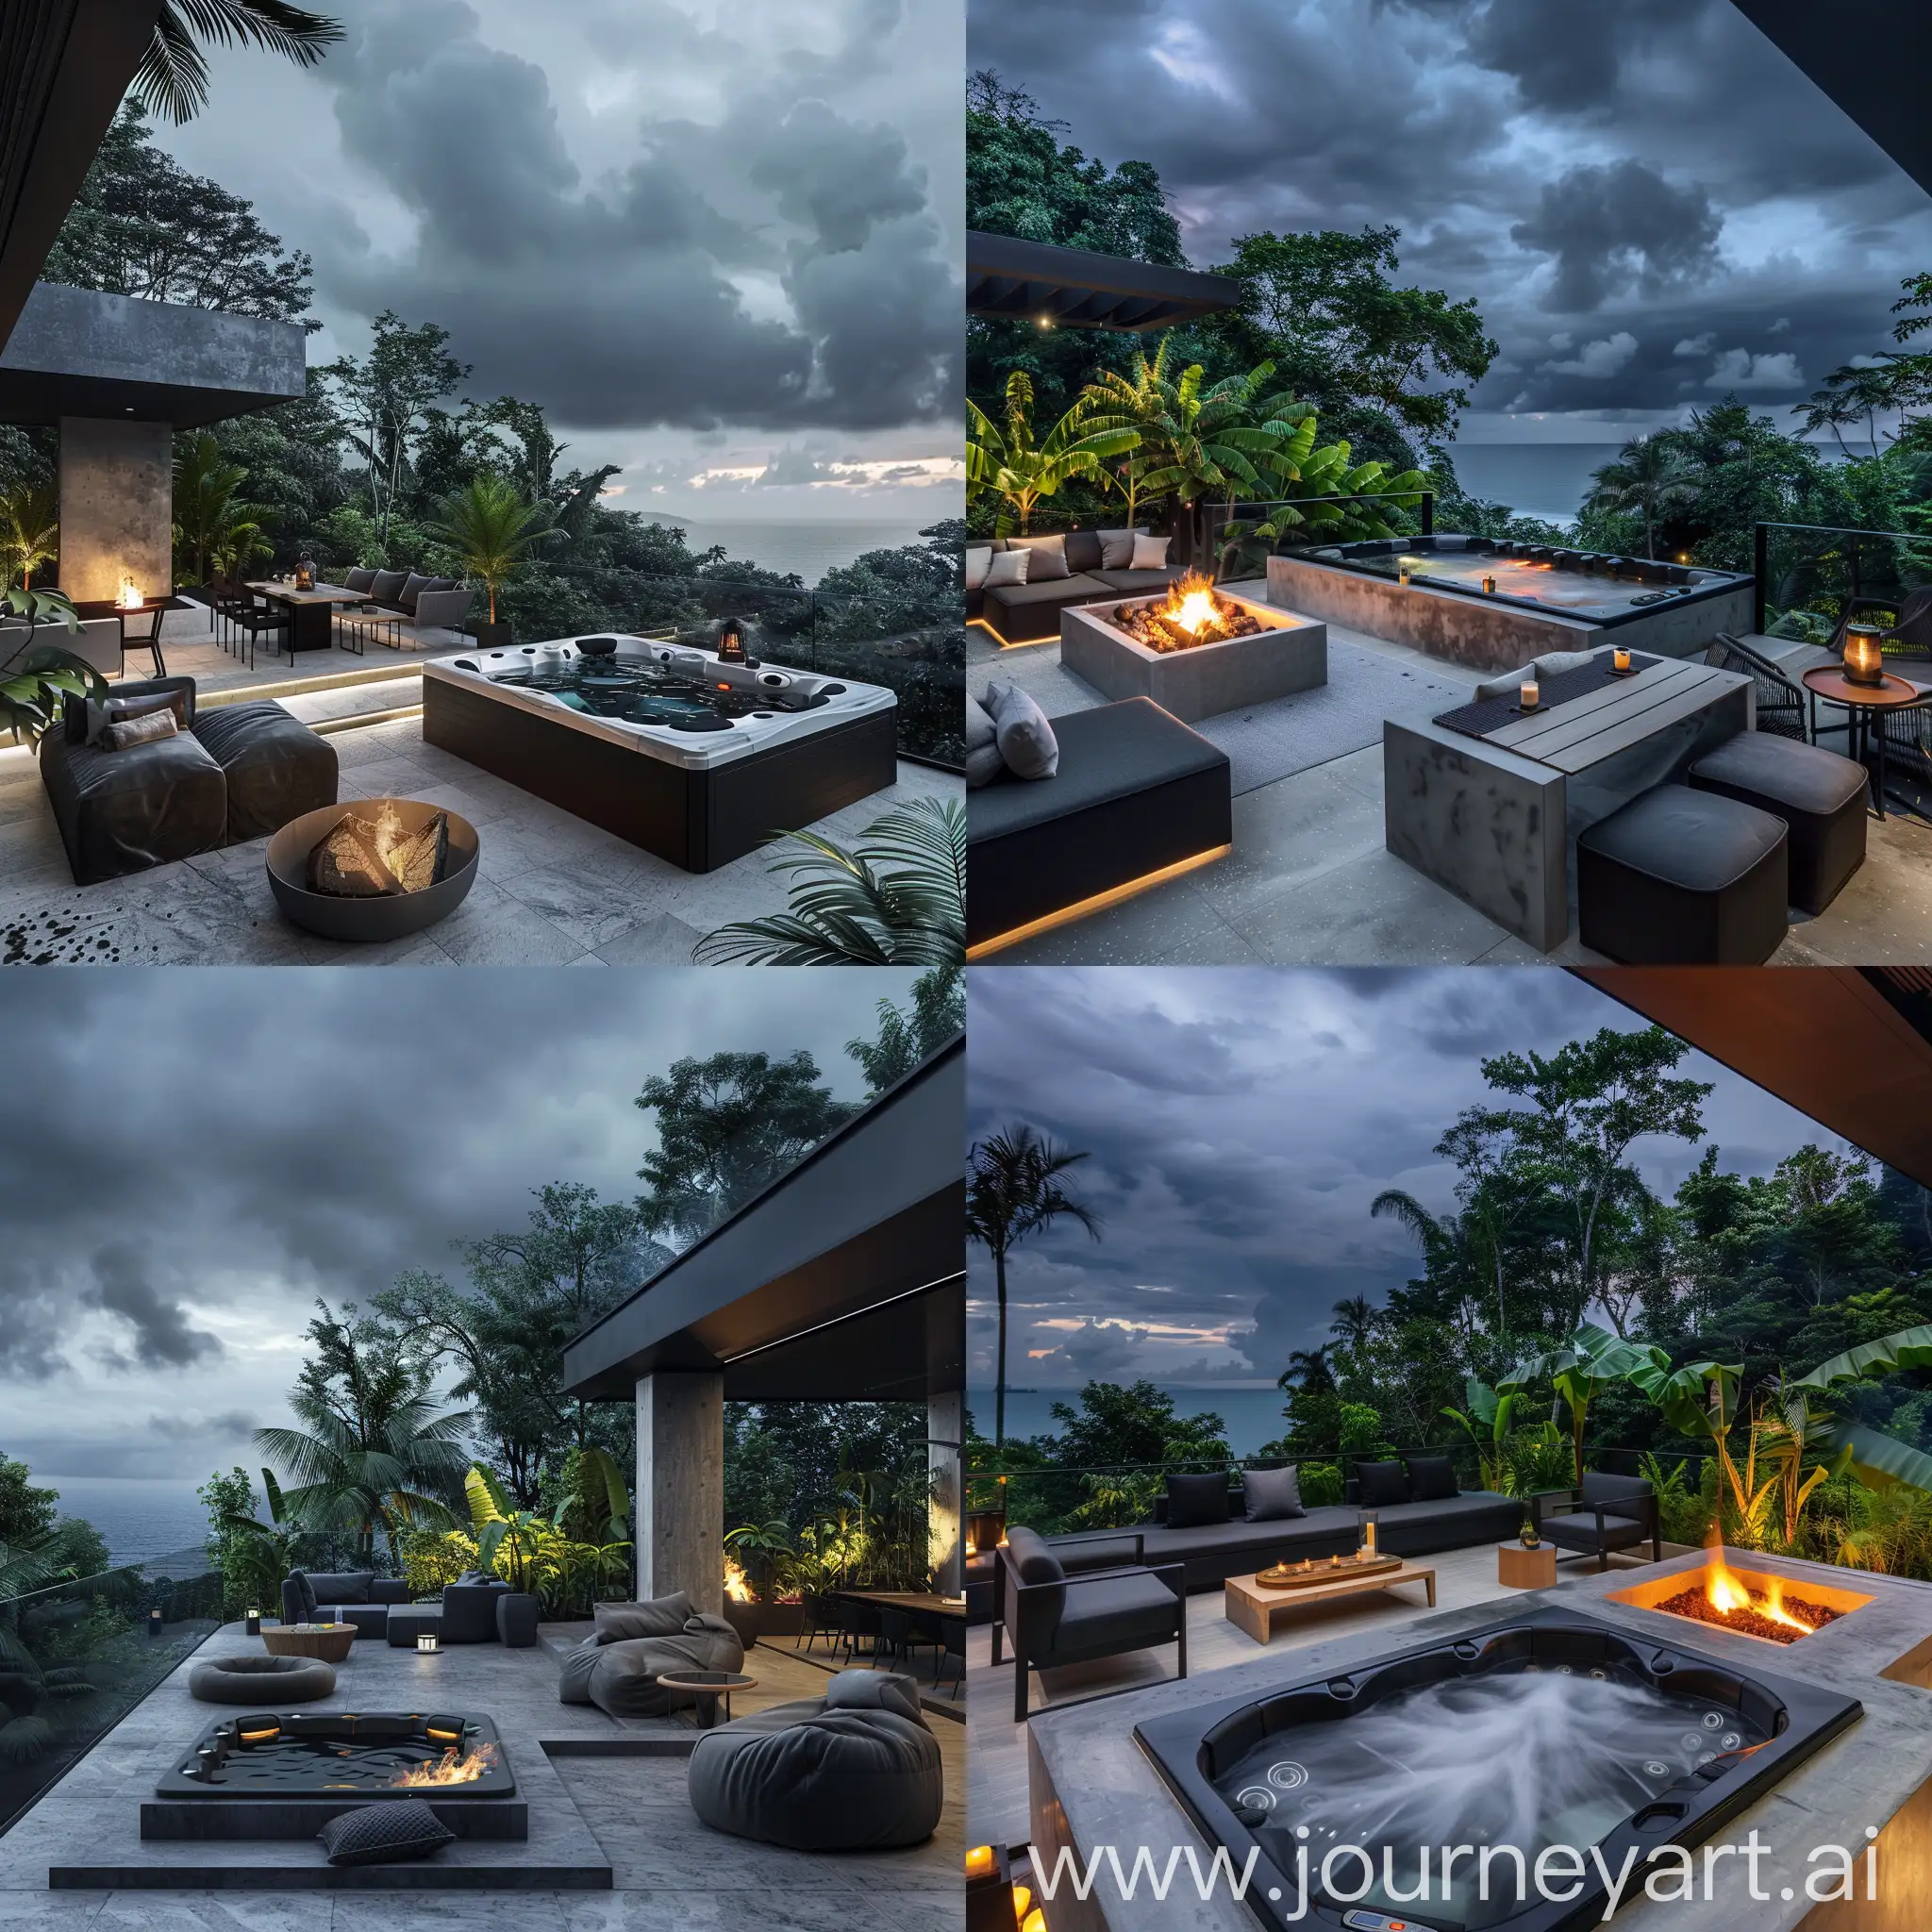 Luxurious-Modern-Terrace-with-Jacuzzi-and-Tropical-Forest-View